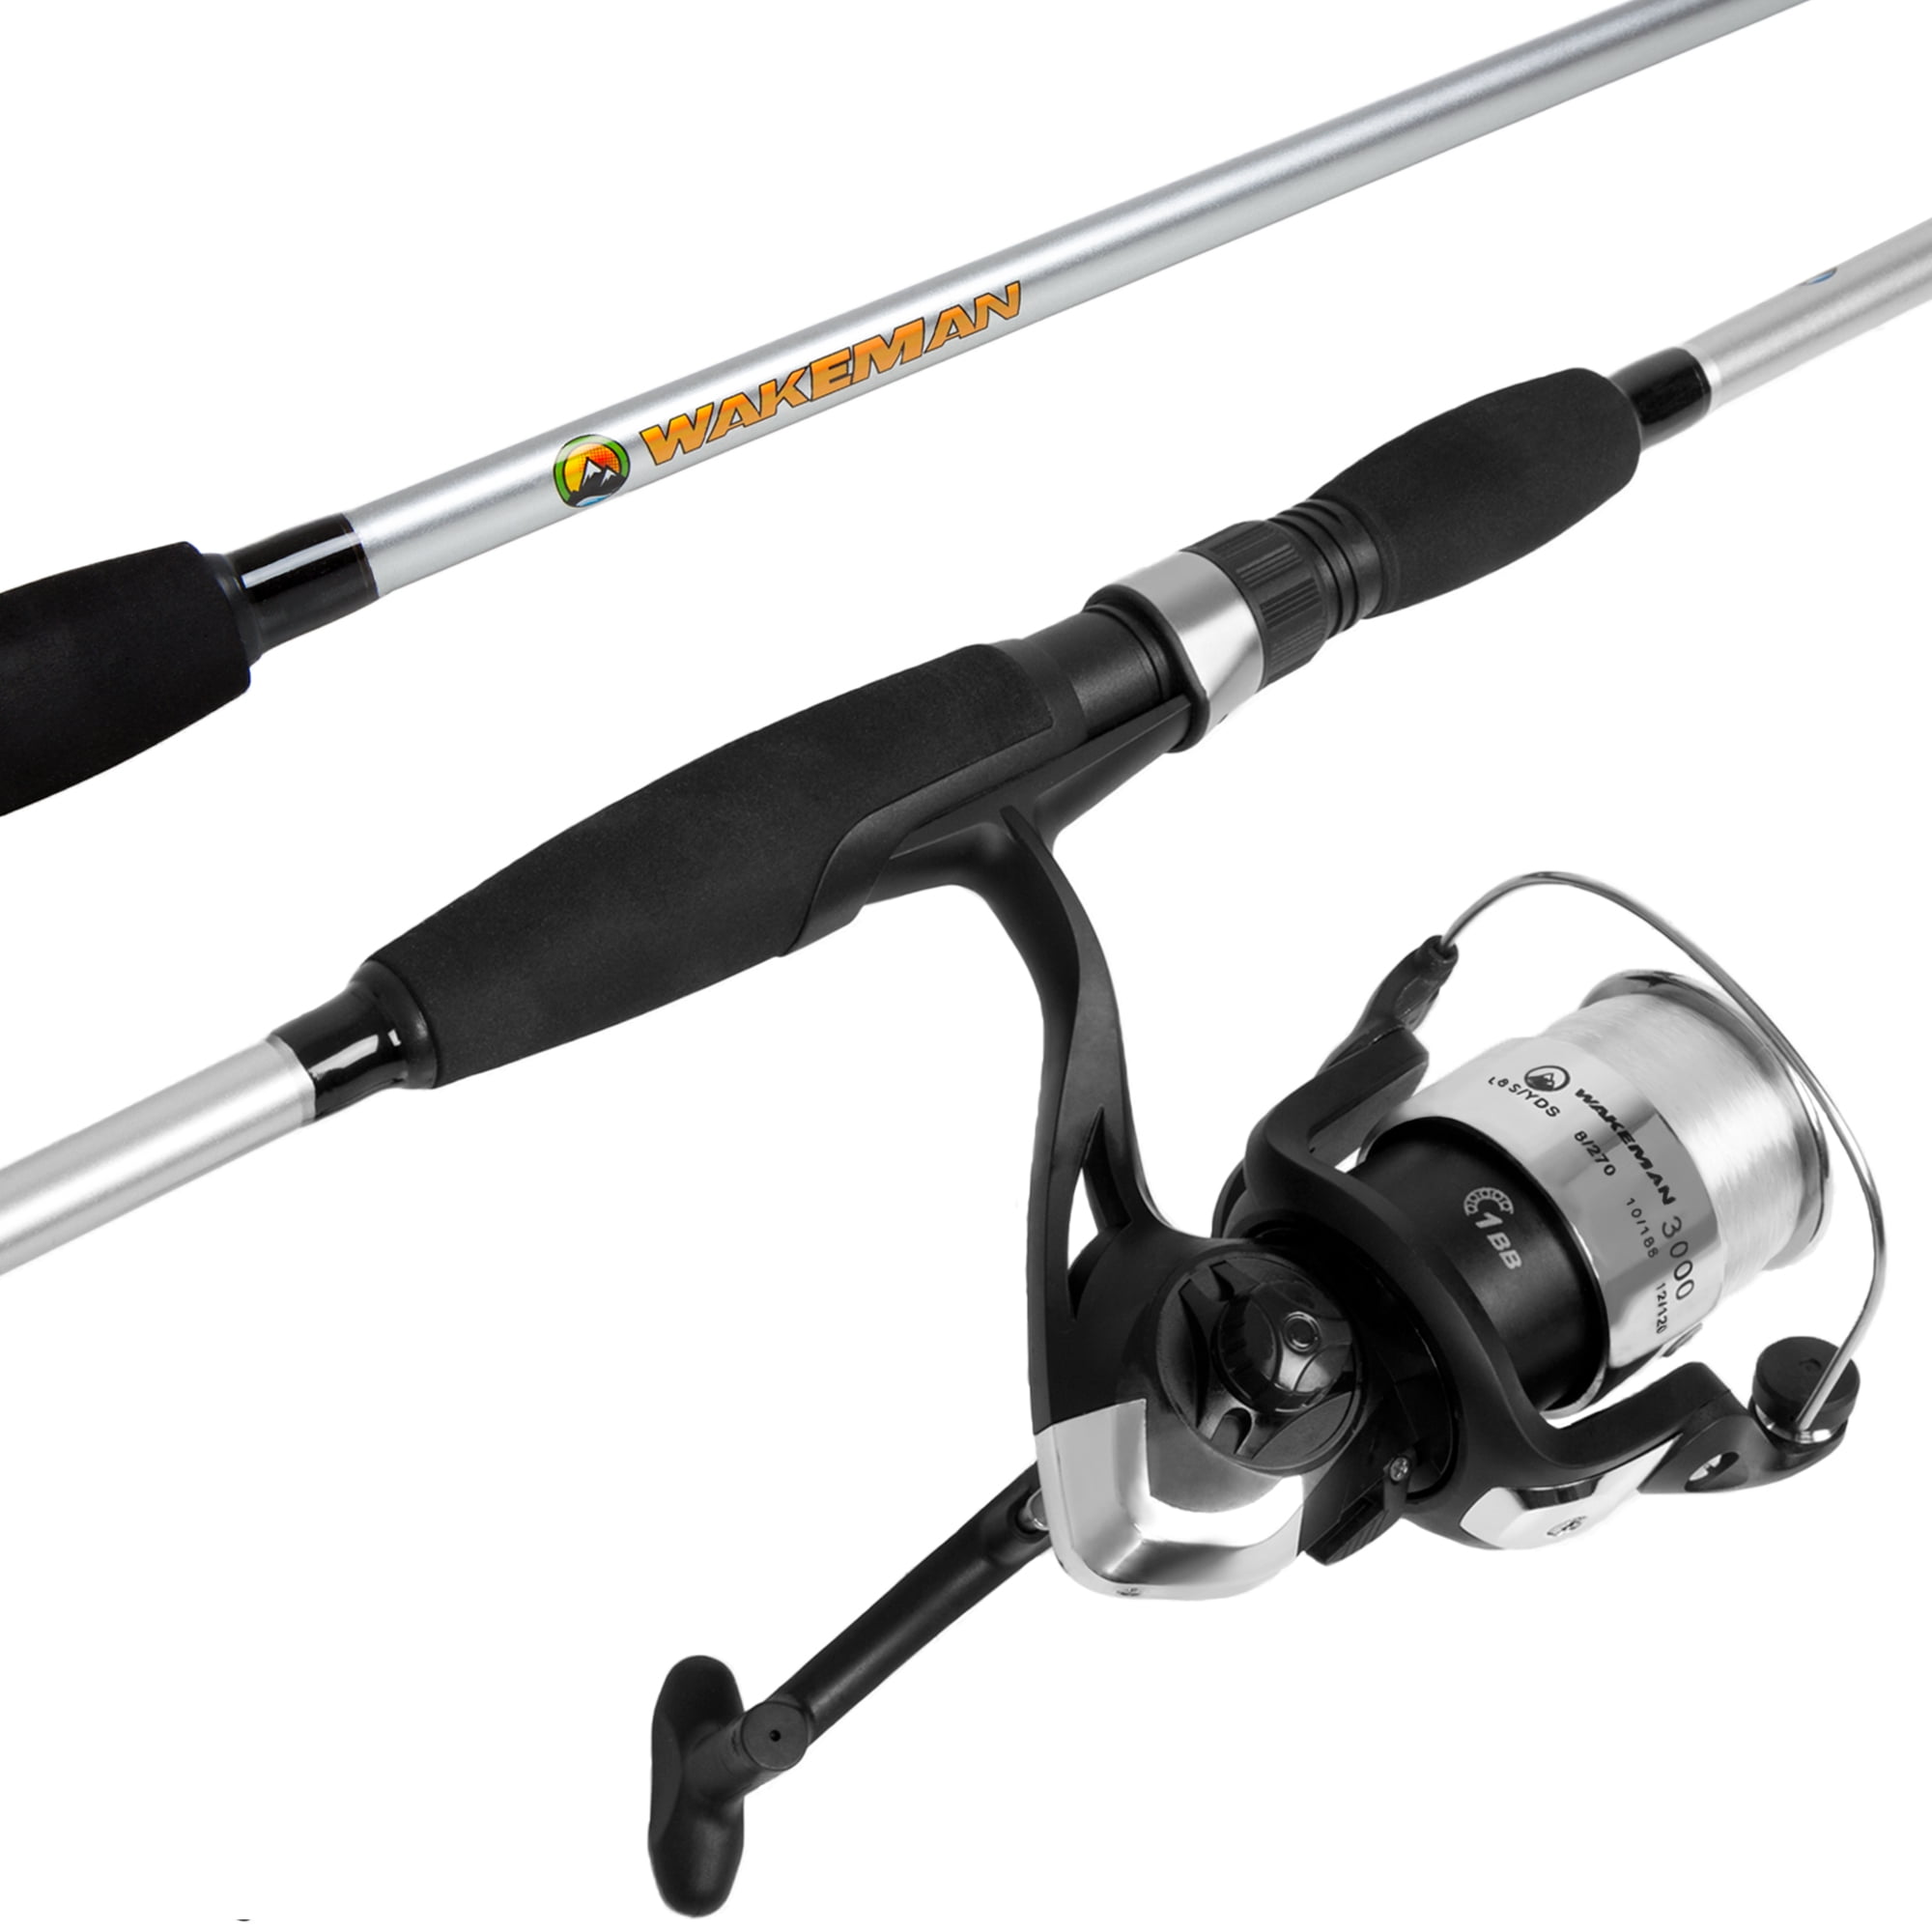 Wakeman Strike Series Spinning Rod and Reel Combo - Trophy Gold